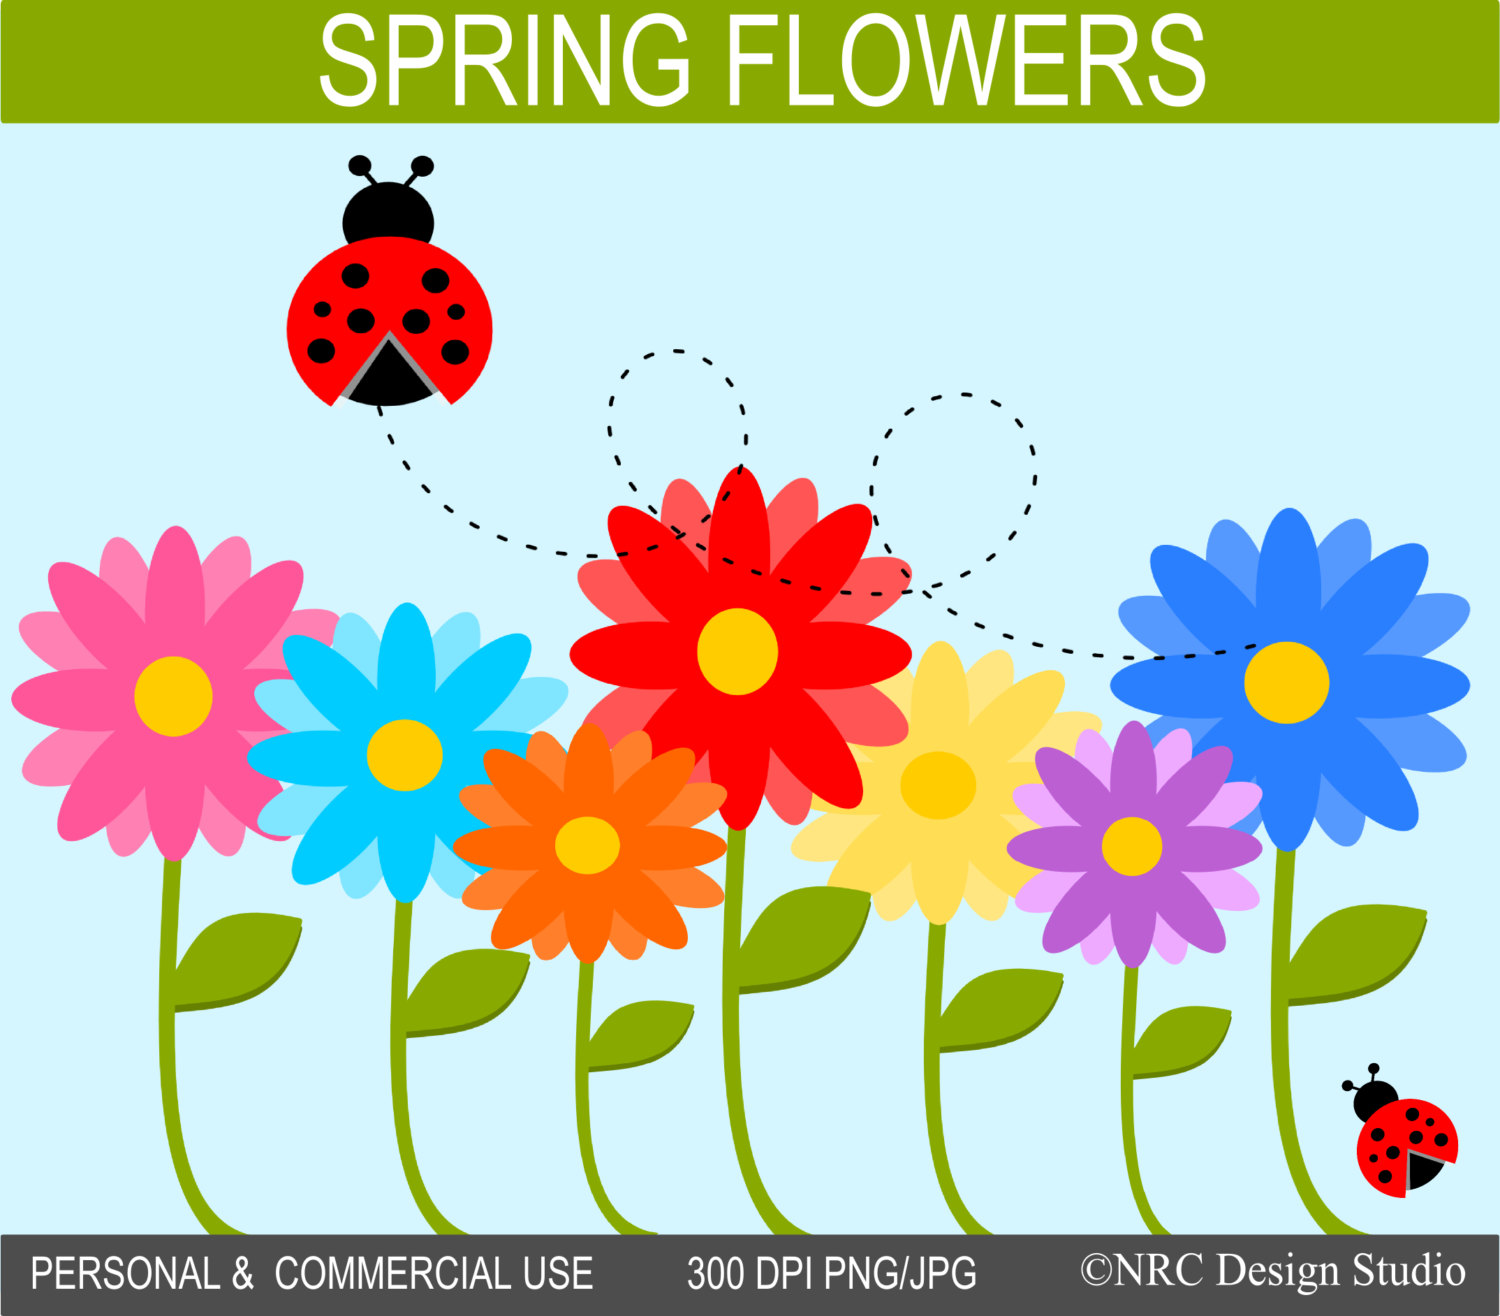 Spring flowers clipart image 